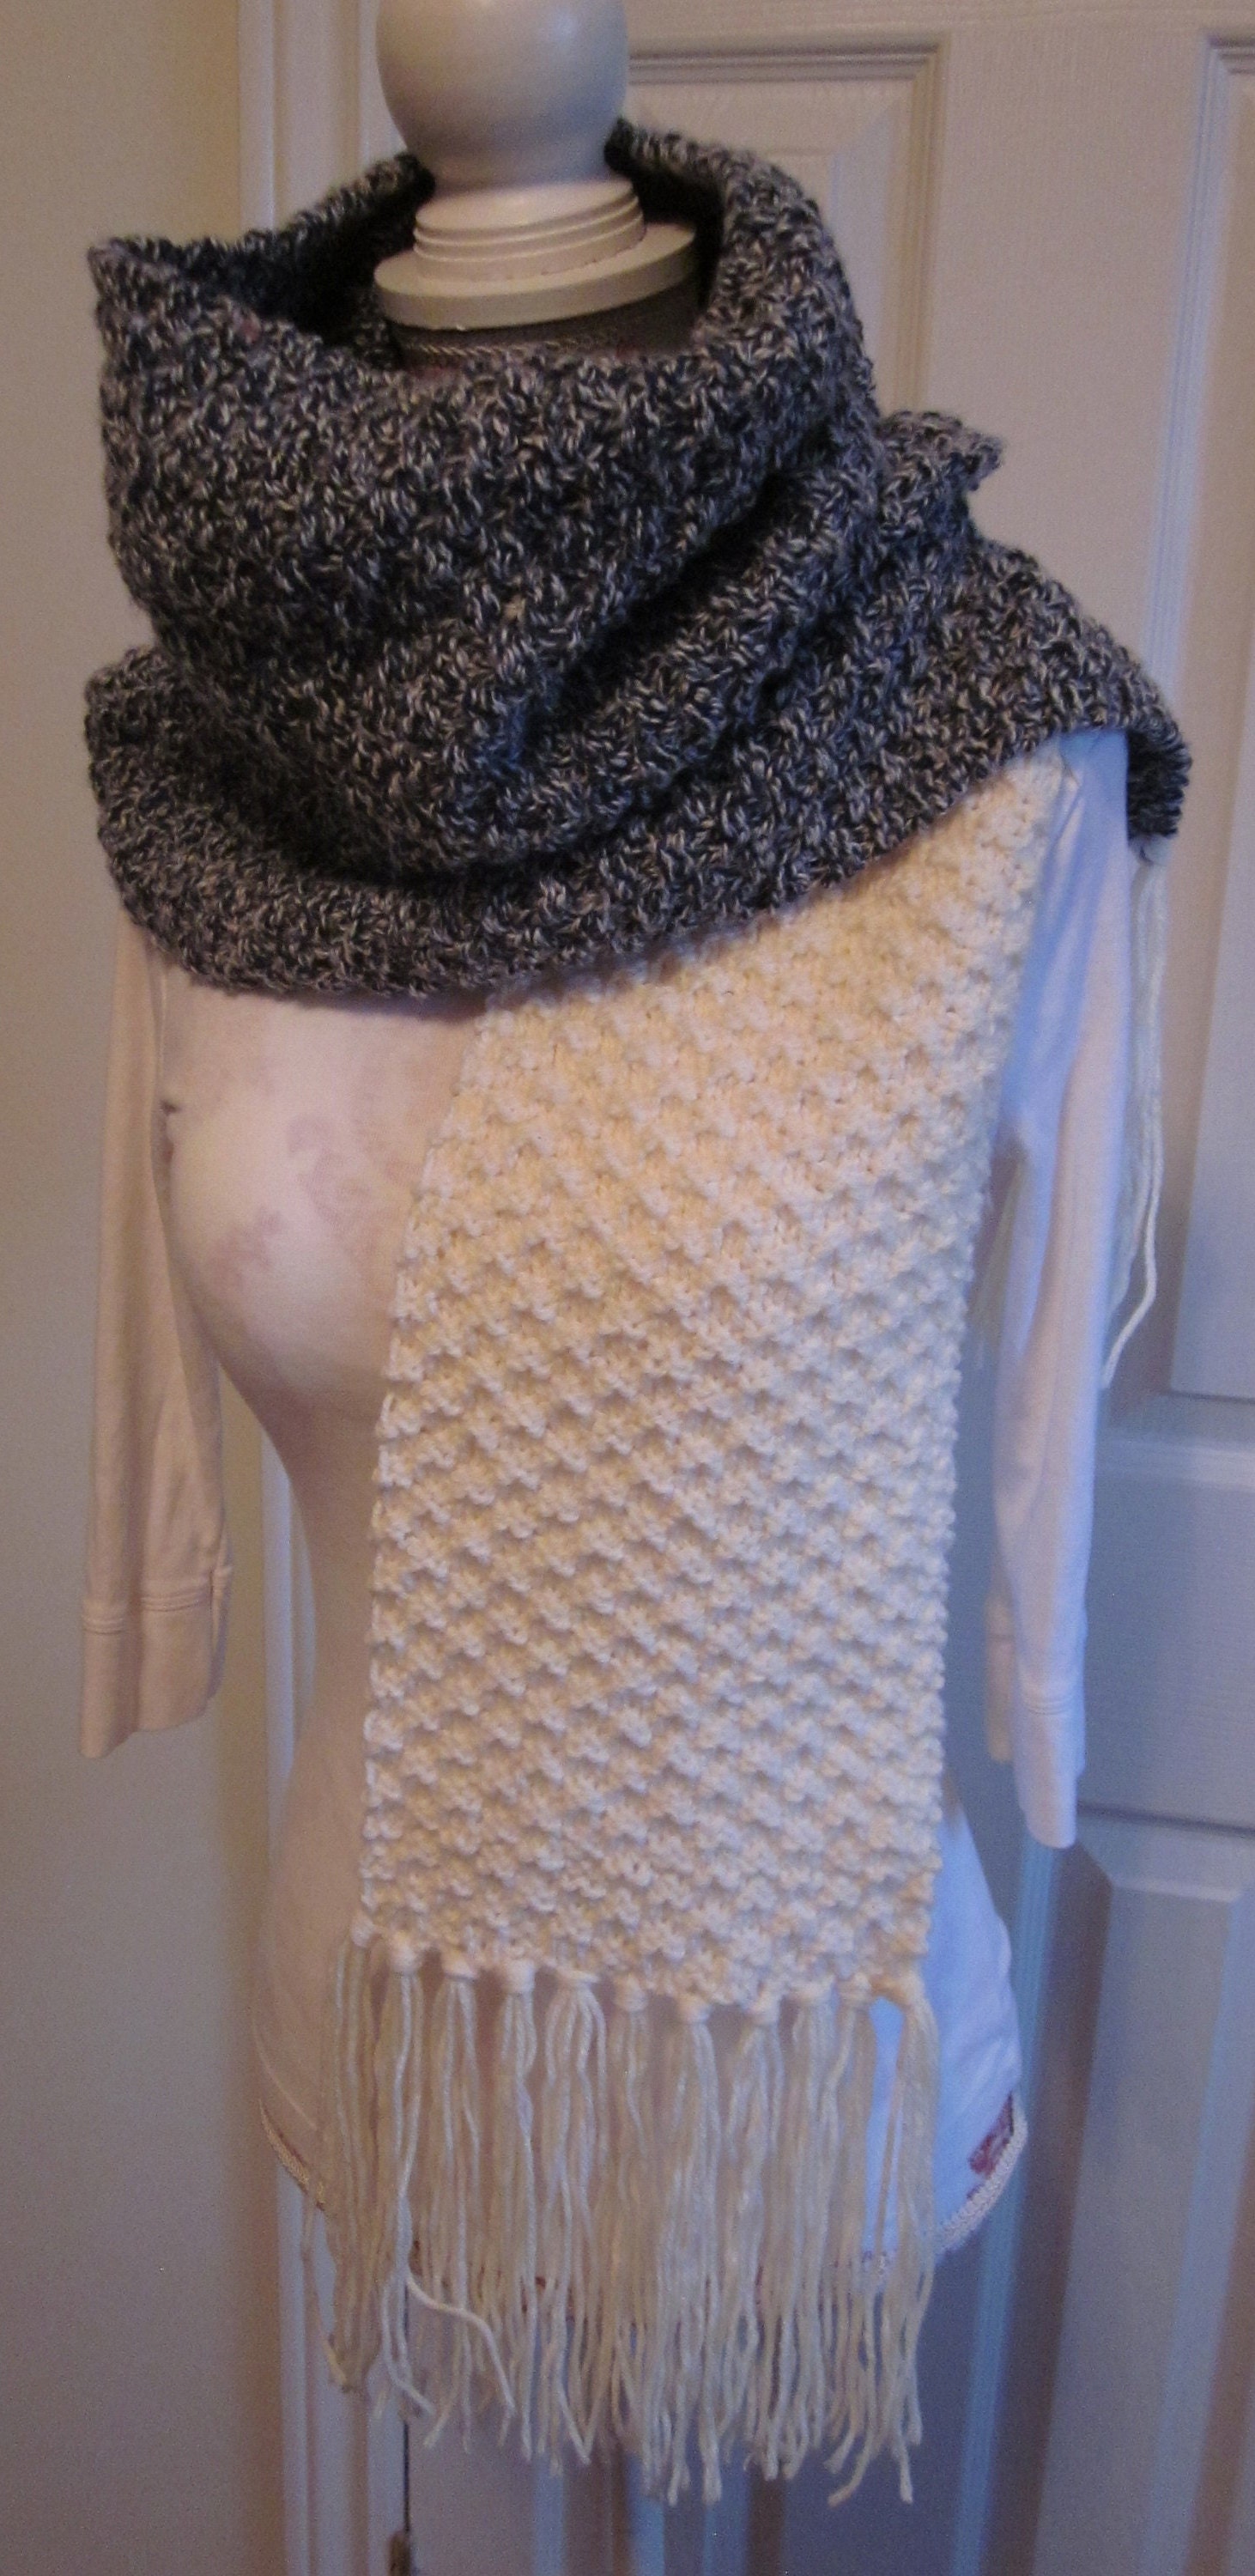 Hurdle Stitch Scarf - Loom Knitted Pattern and video tutorial